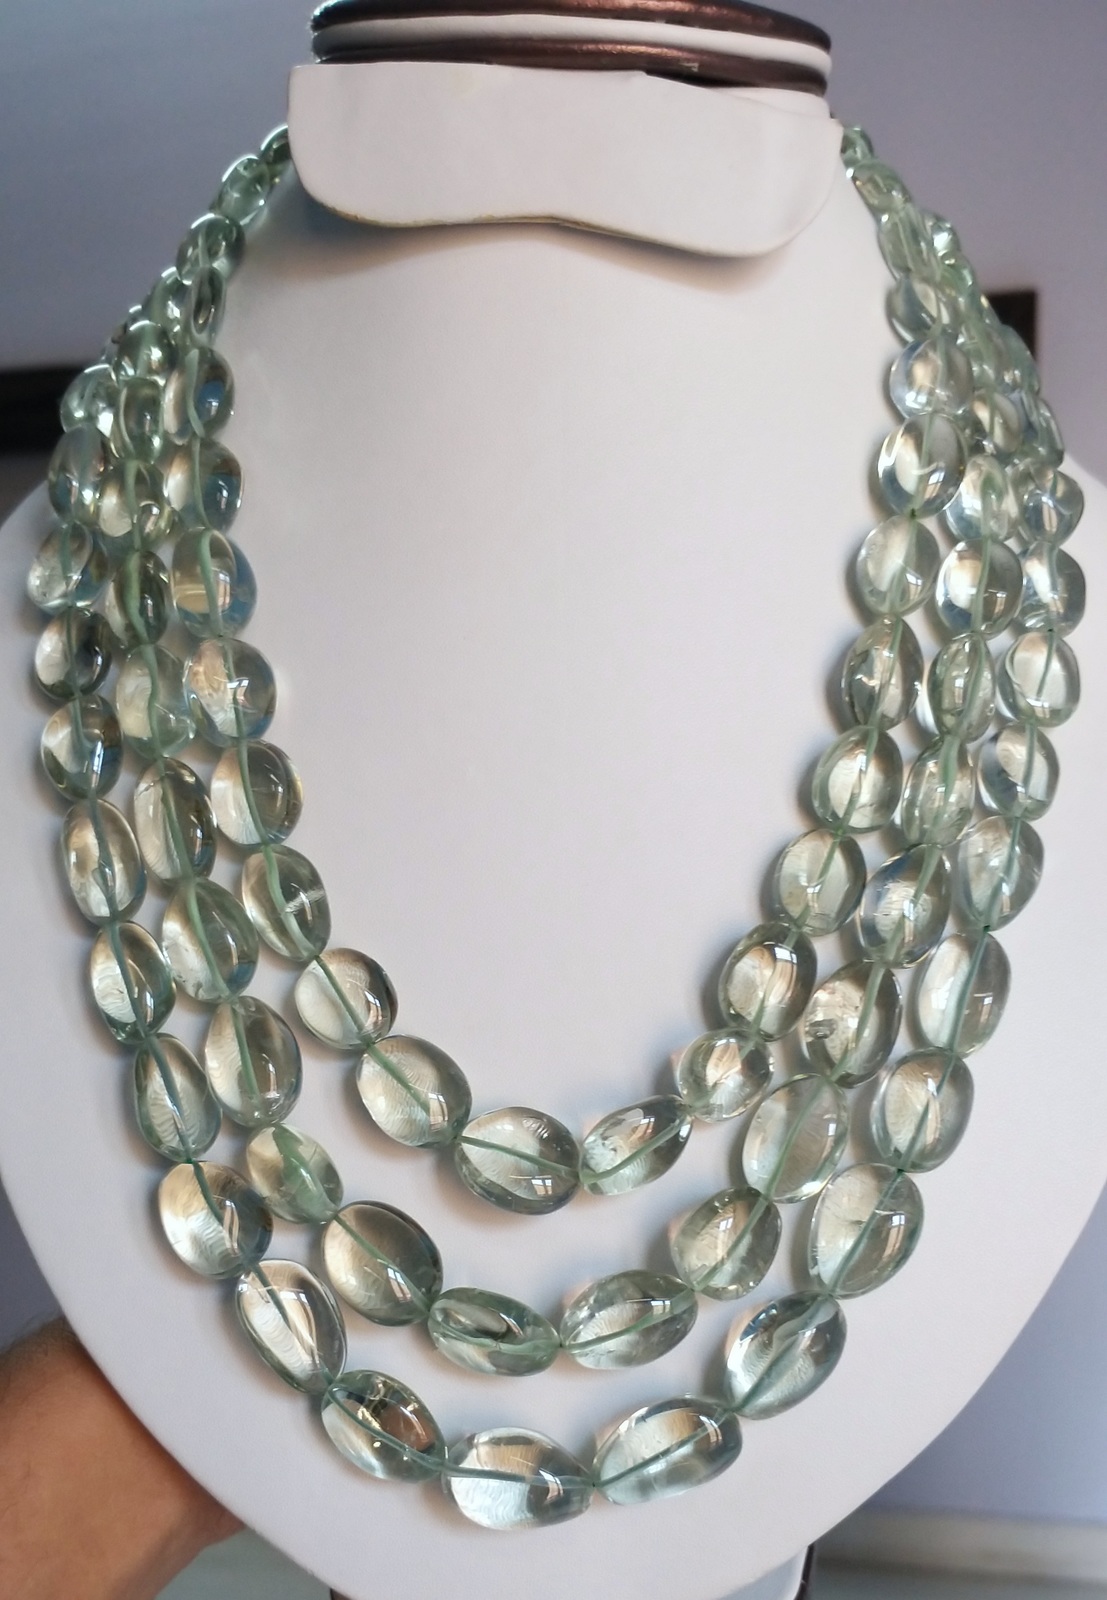 Primary image for Natural Green Amethyst Tumble Beads Necklace, Layered Smooth Beads Necklace